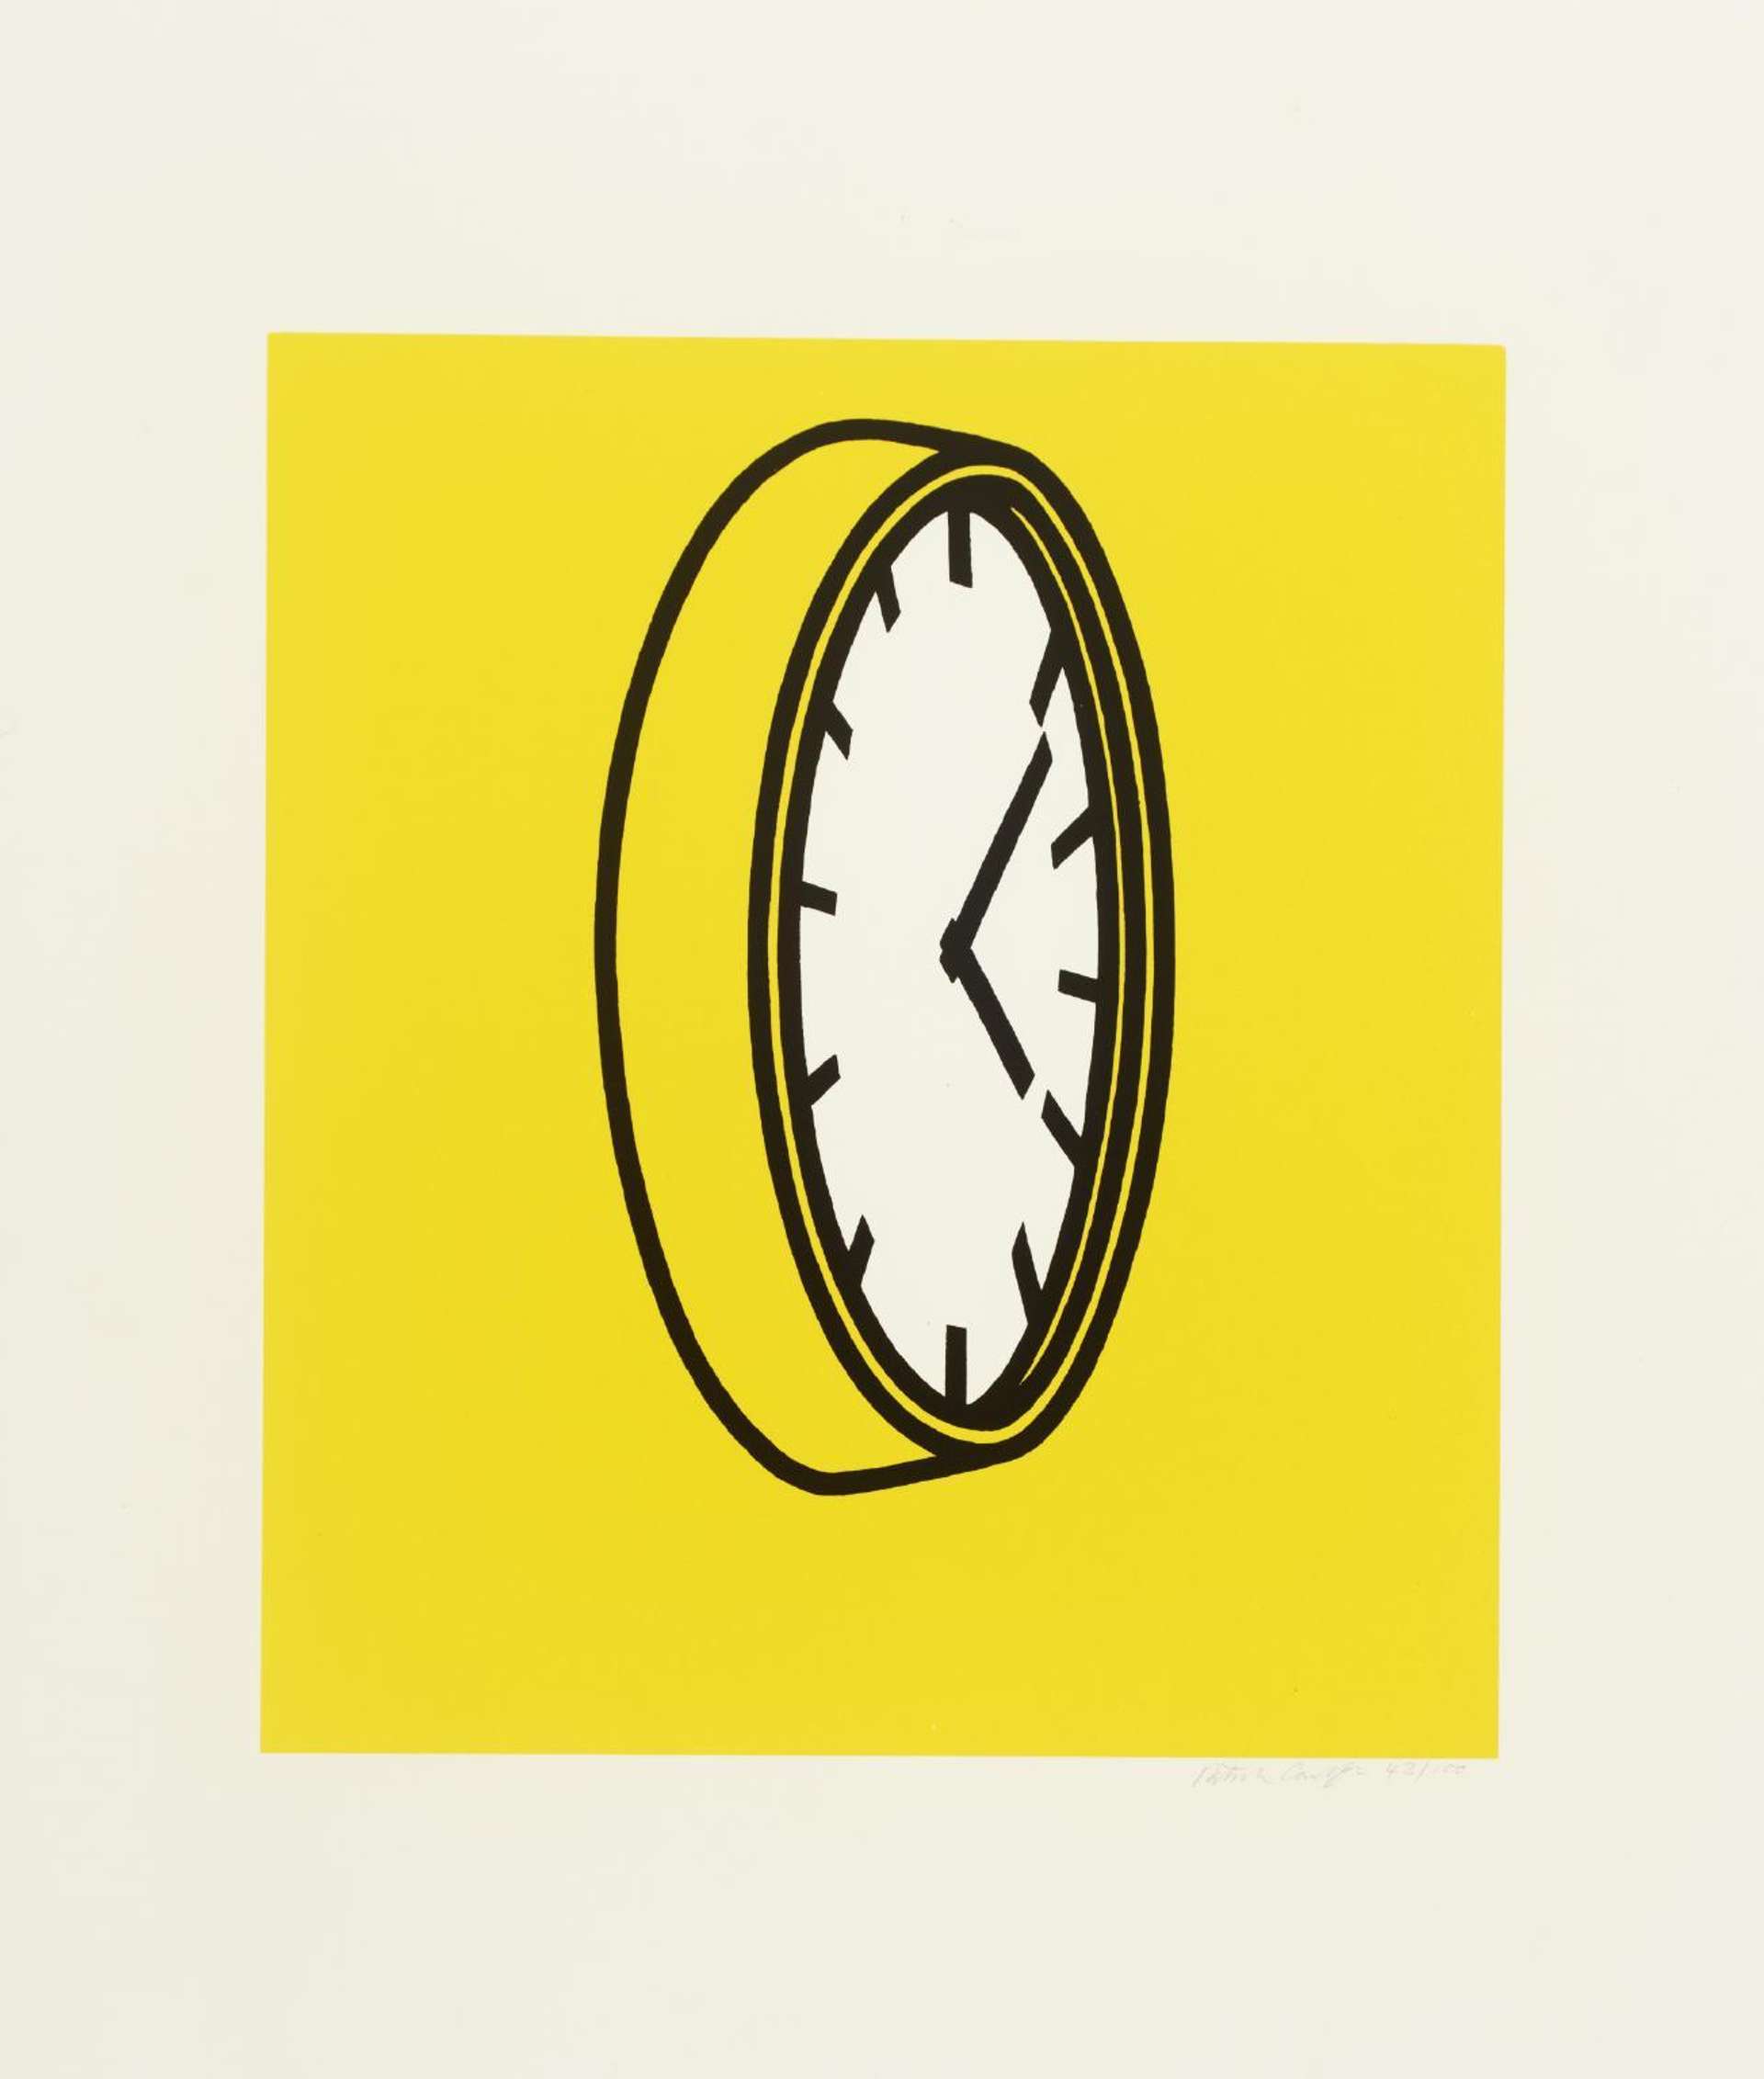 An image of the print ‘Crying to the walls: My God! My God! Will she relent?’ by Patrick Caulfield: a monochrome wall clock seen from the side, against a bright yellow background.